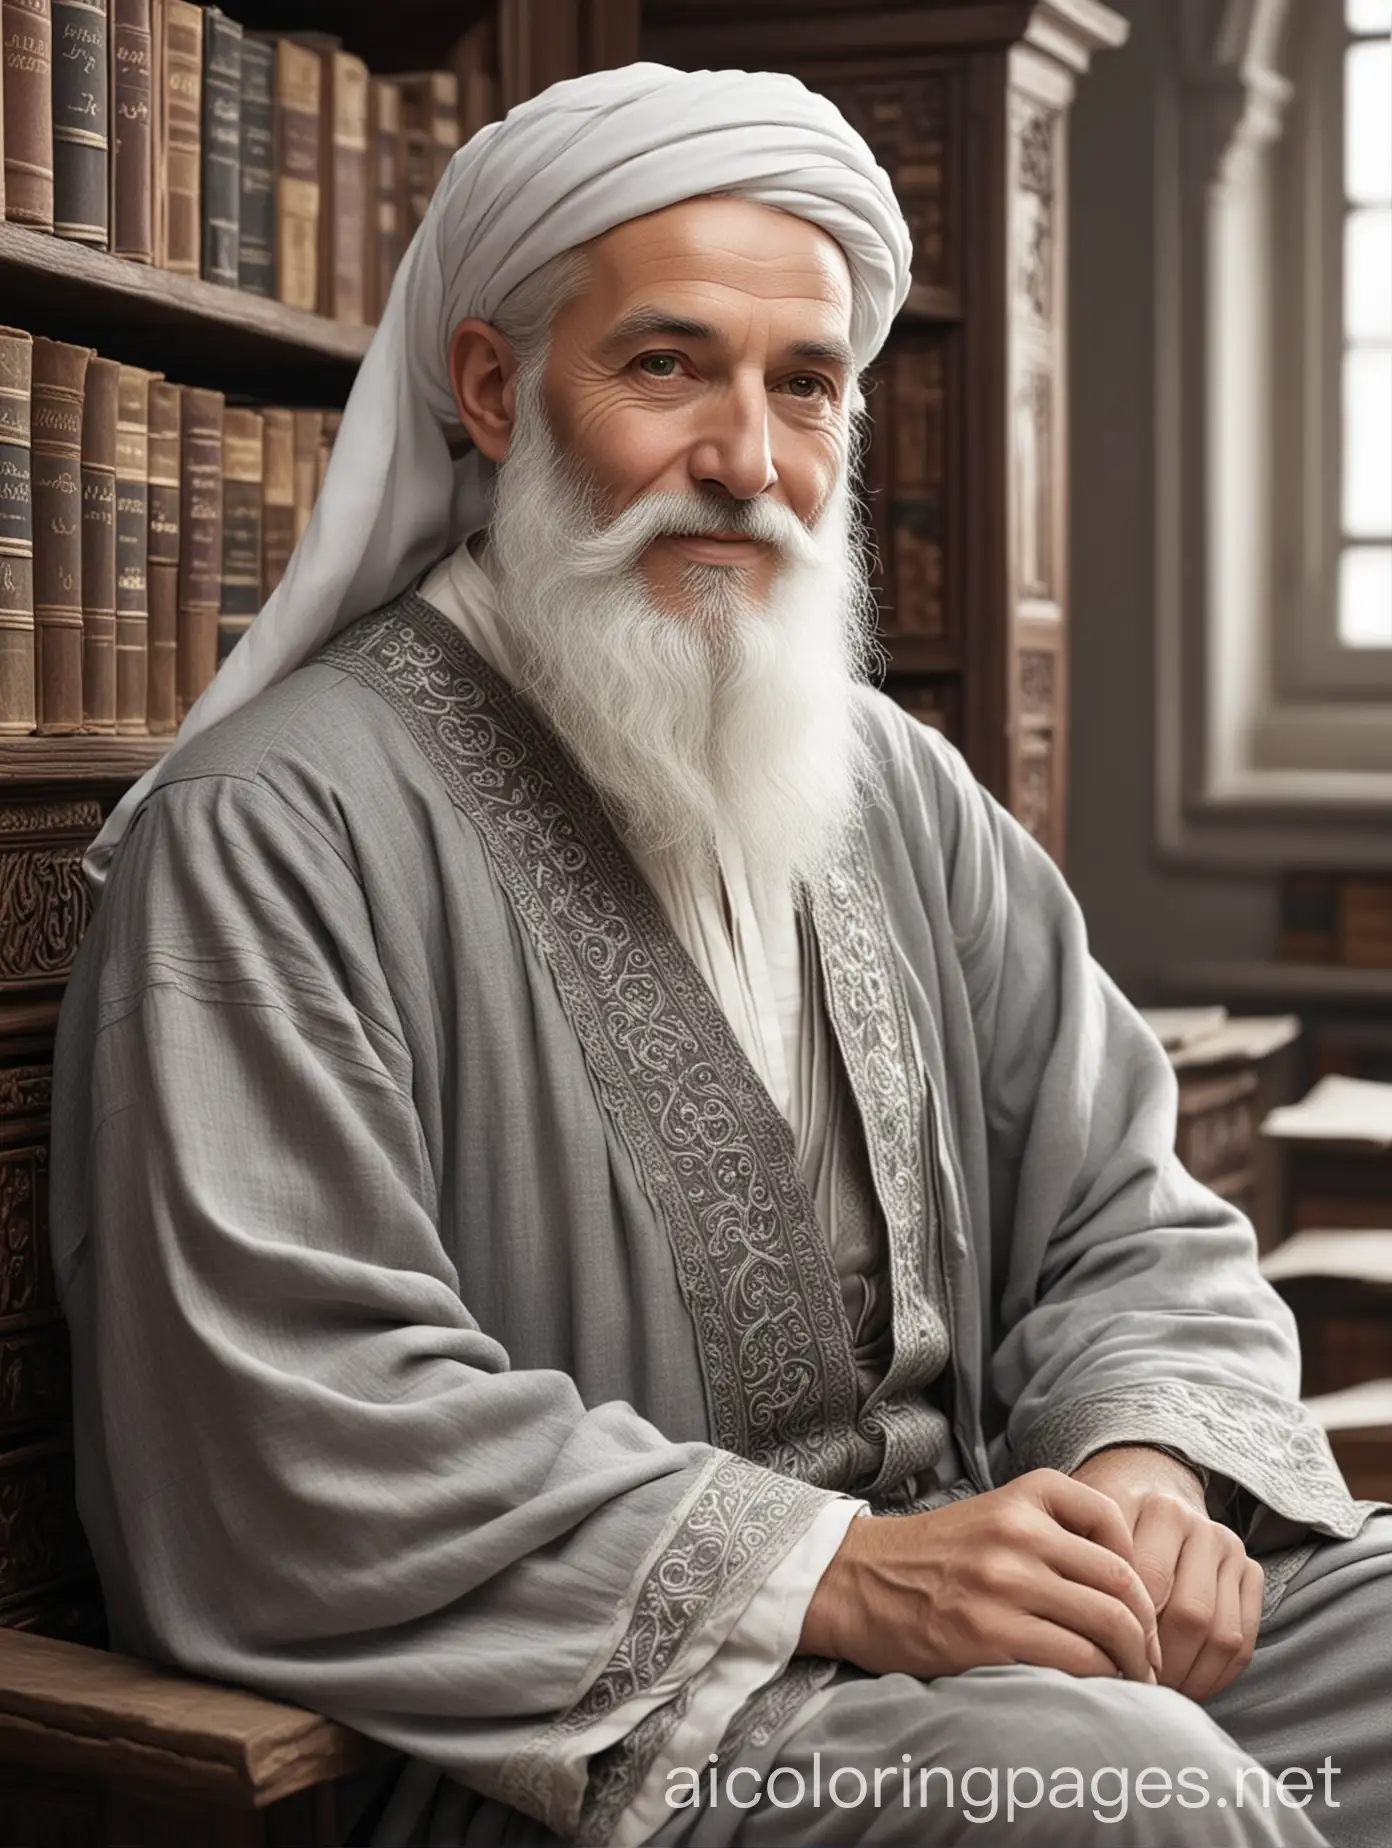 A wise middle-aged man from the Islamic era, with white skin and a long and thick white beard, staring at the lens, smiling faintly, sitting in an old library, dressed in beautiful gray clothes, very realistic, 4K, vintage, so that the whole body is visible. , Coloring Page, black and white, line art, white background, Simplicity, Ample White Space. The background of the coloring page is plain white to make it easy for young children to color within the lines. The outlines of all the subjects are easy to distinguish, making it simple for kids to color without too much difficulty